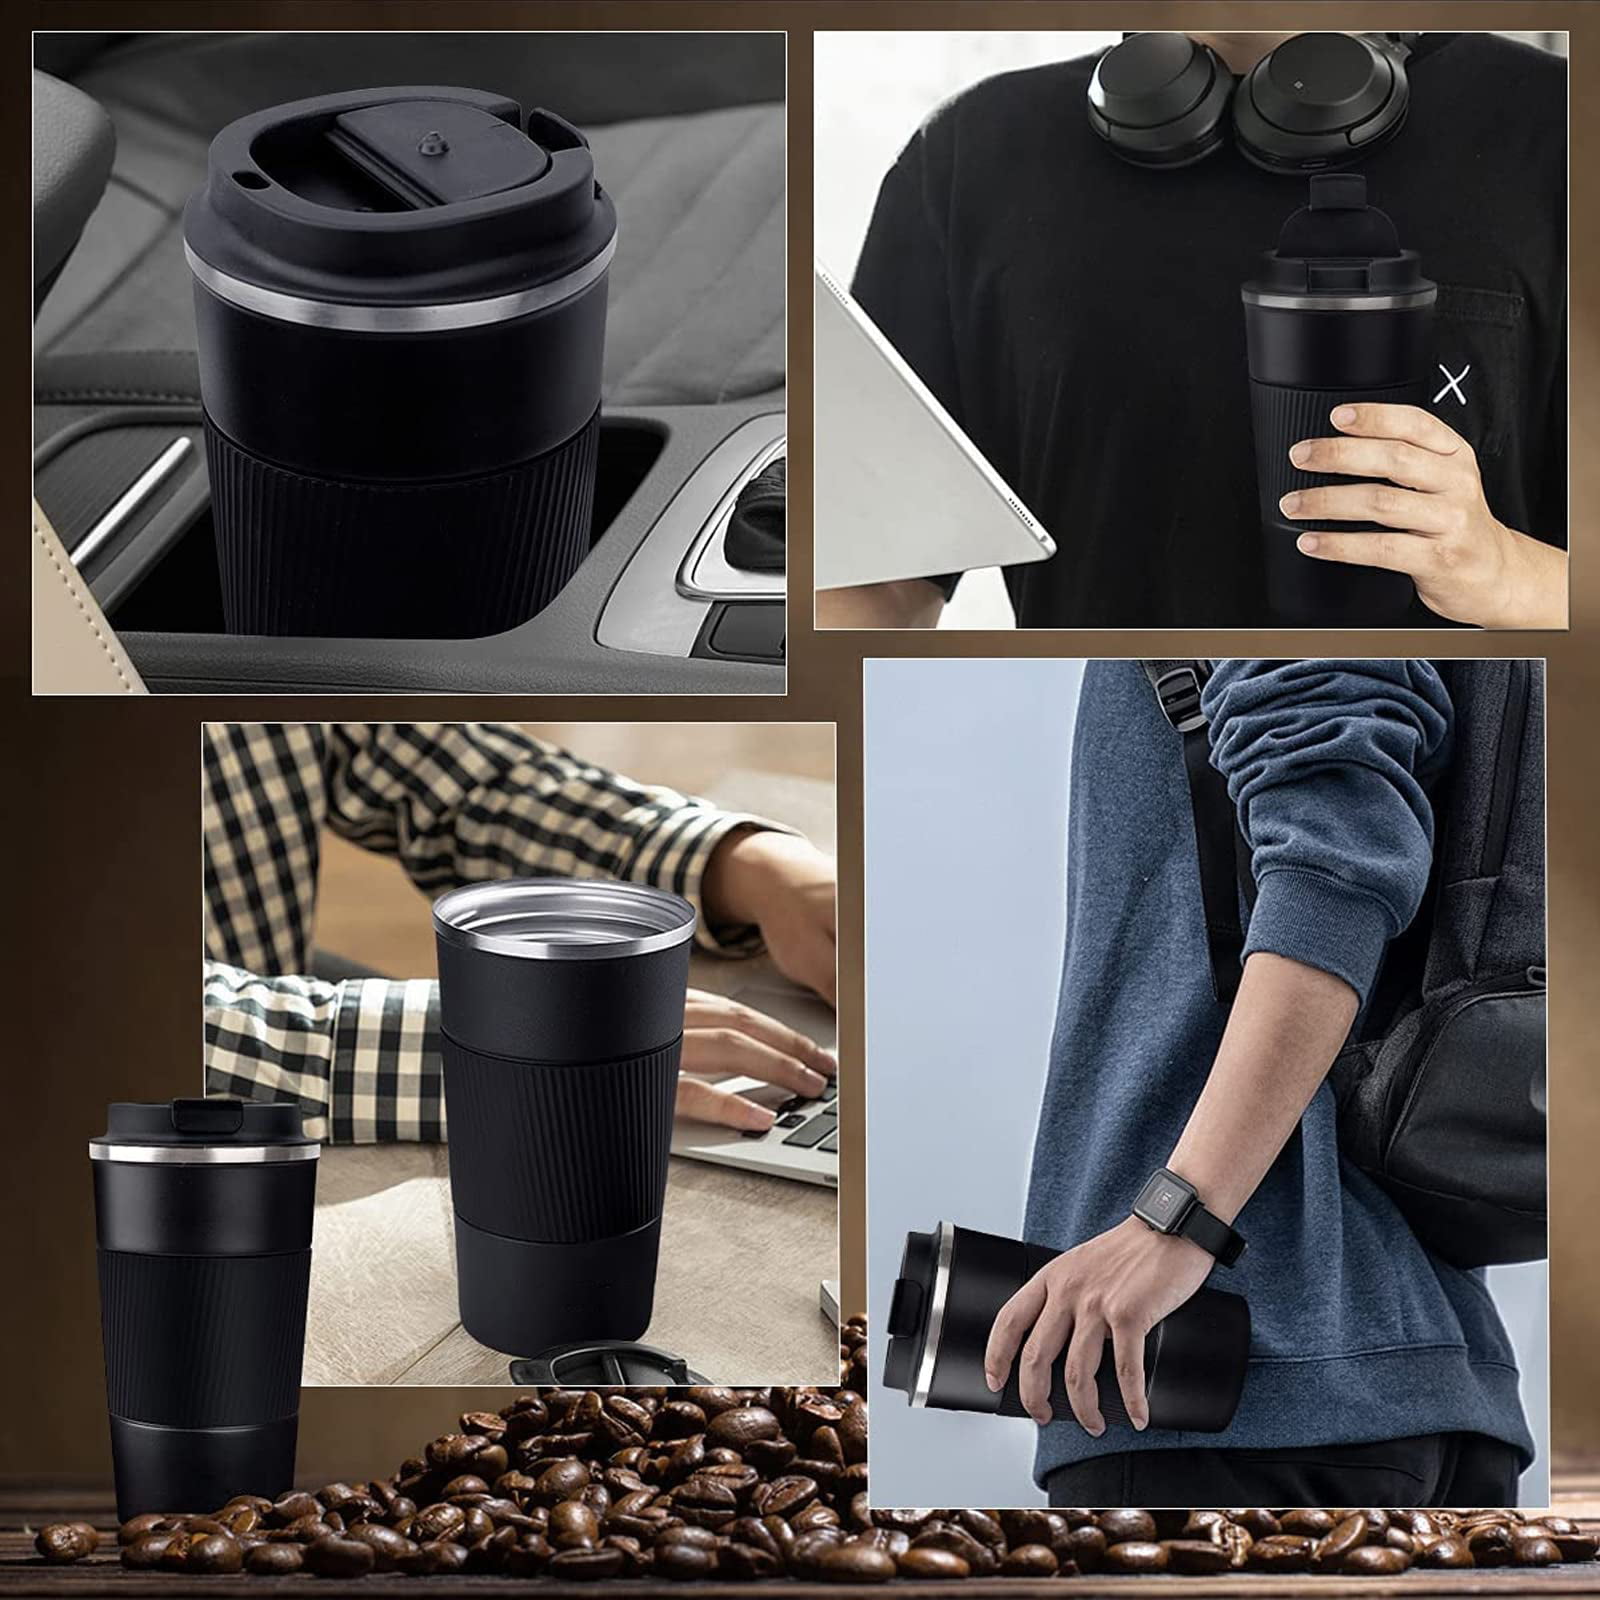 Heimden Coffee Tumbler Sleeve insulated coffee mug - Double wall stainless  steel fits most starbucks…See more Heimden Coffee Tumbler Sleeve insulated